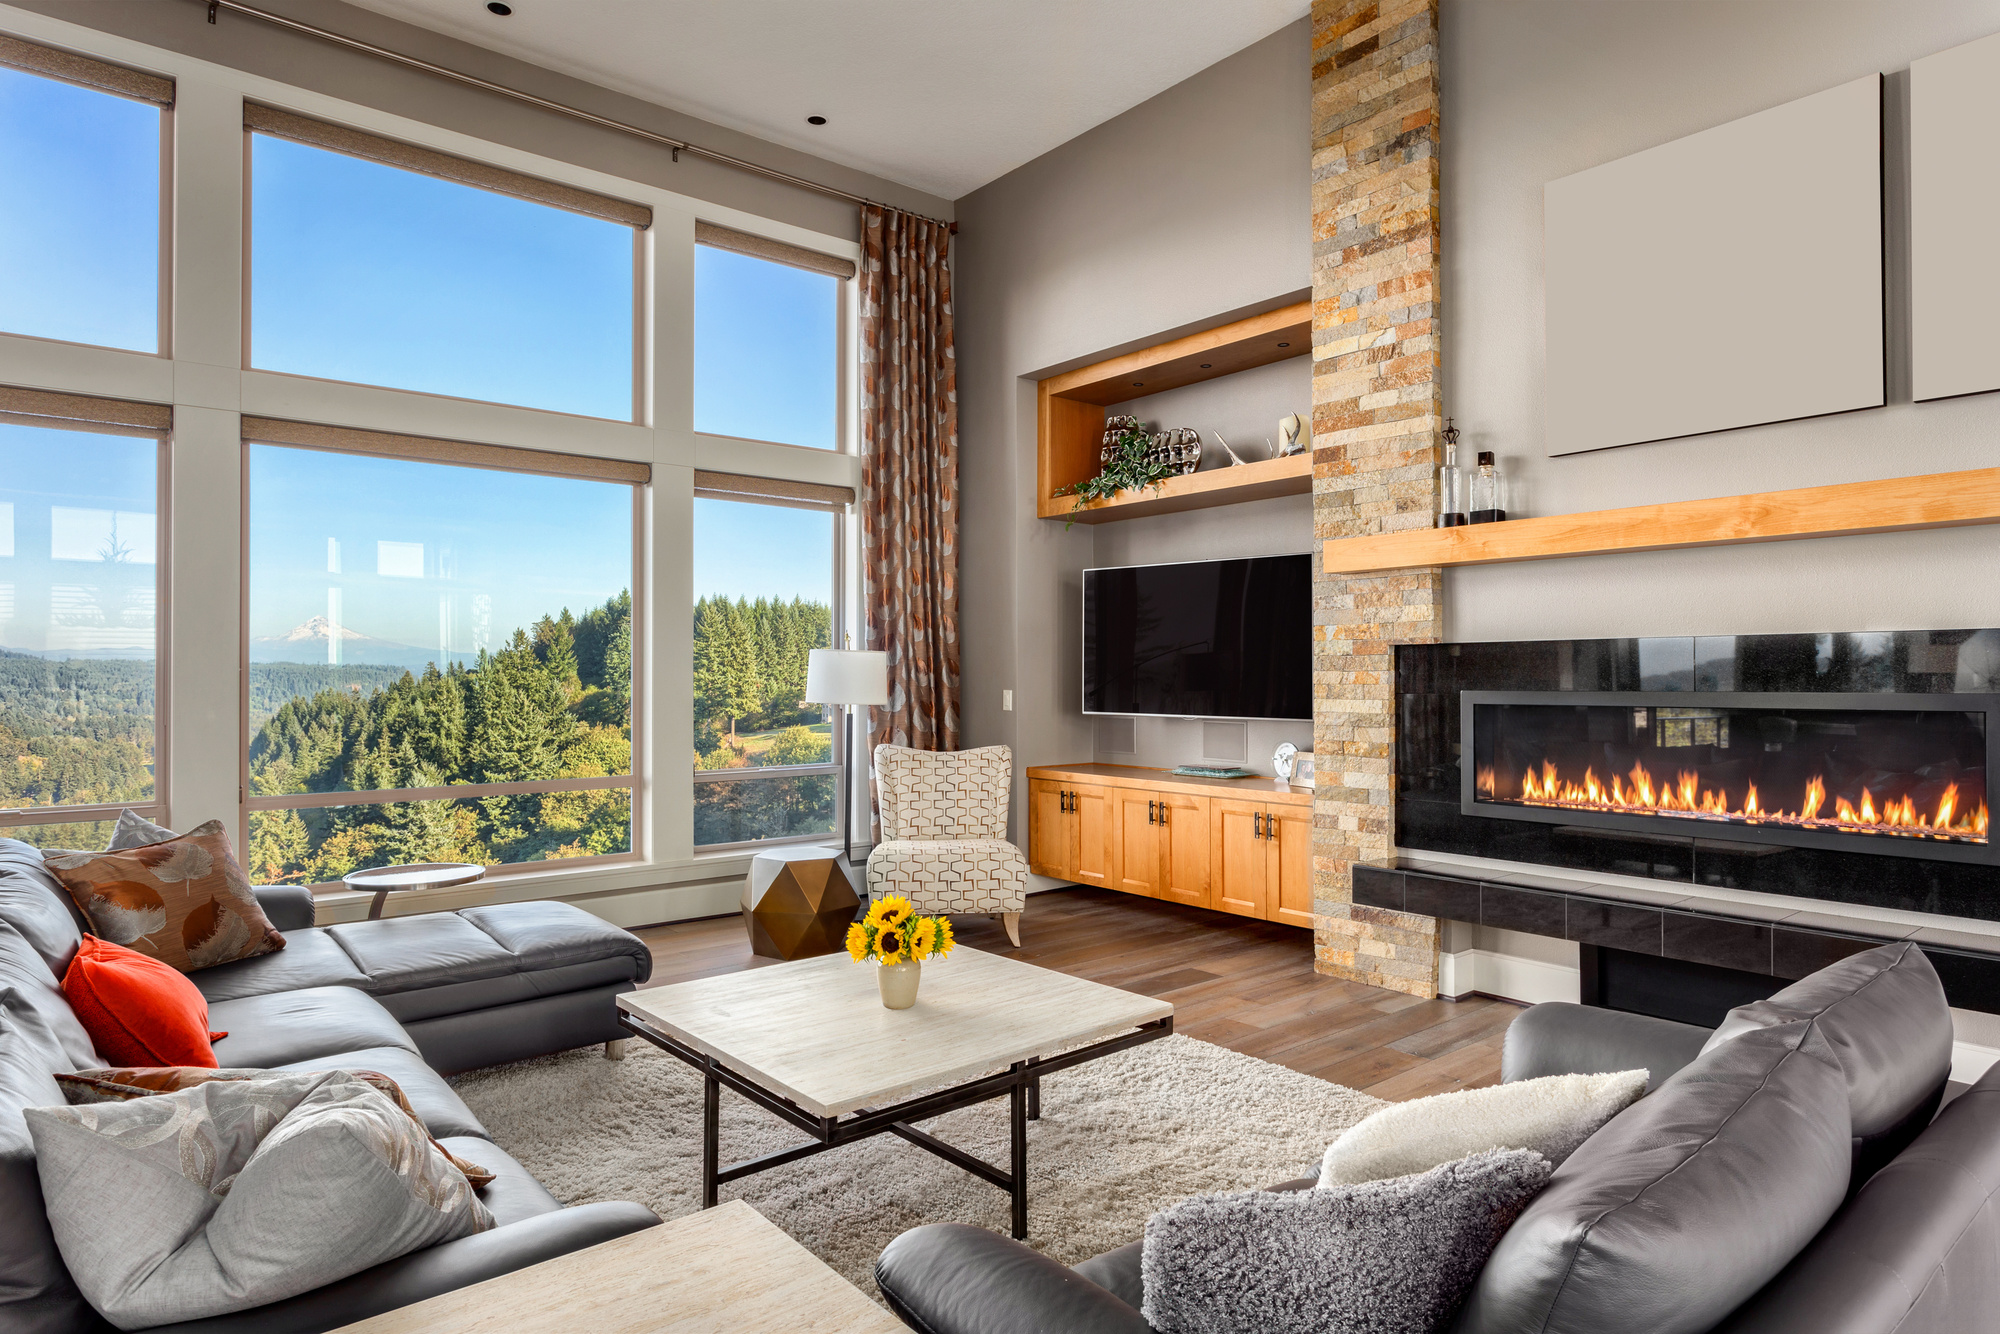 Living Room in Luxury Home with Amazing Mountain View